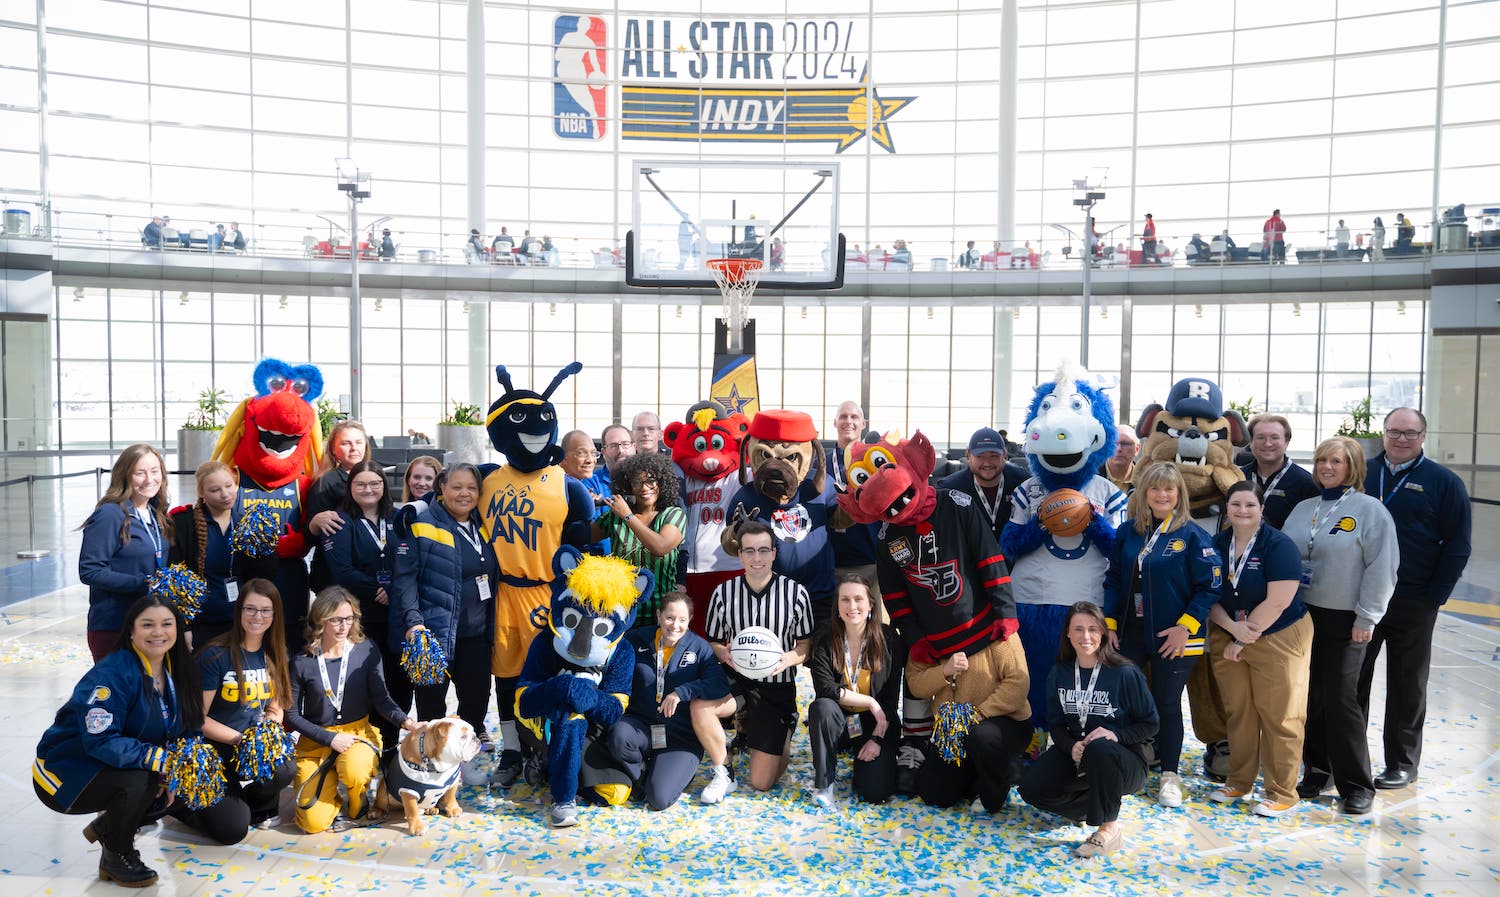 Indianapolis Airport Staff posing with Indiana Sports Mascots